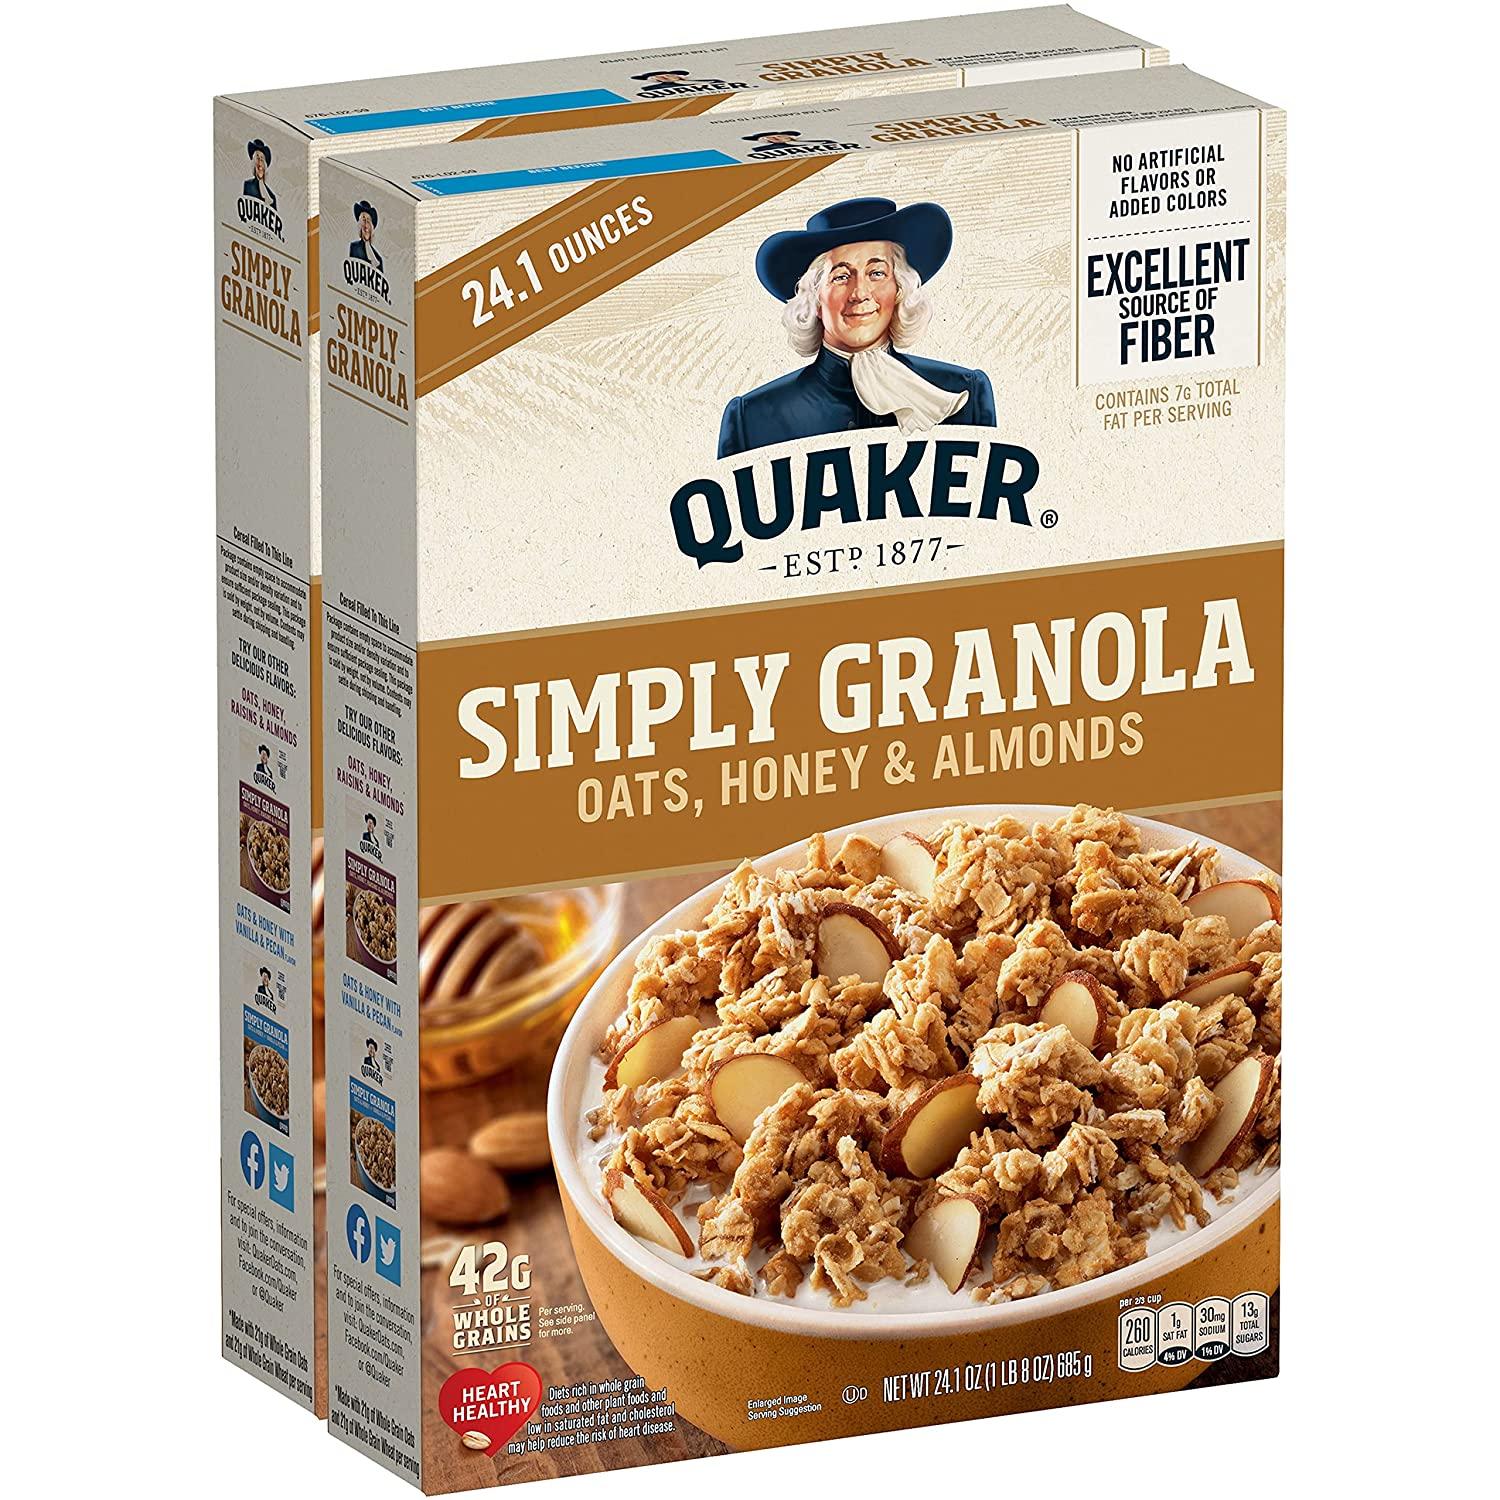 2 Quaker Simply Granola Oats Honey and Almond for $7.69 Shipped